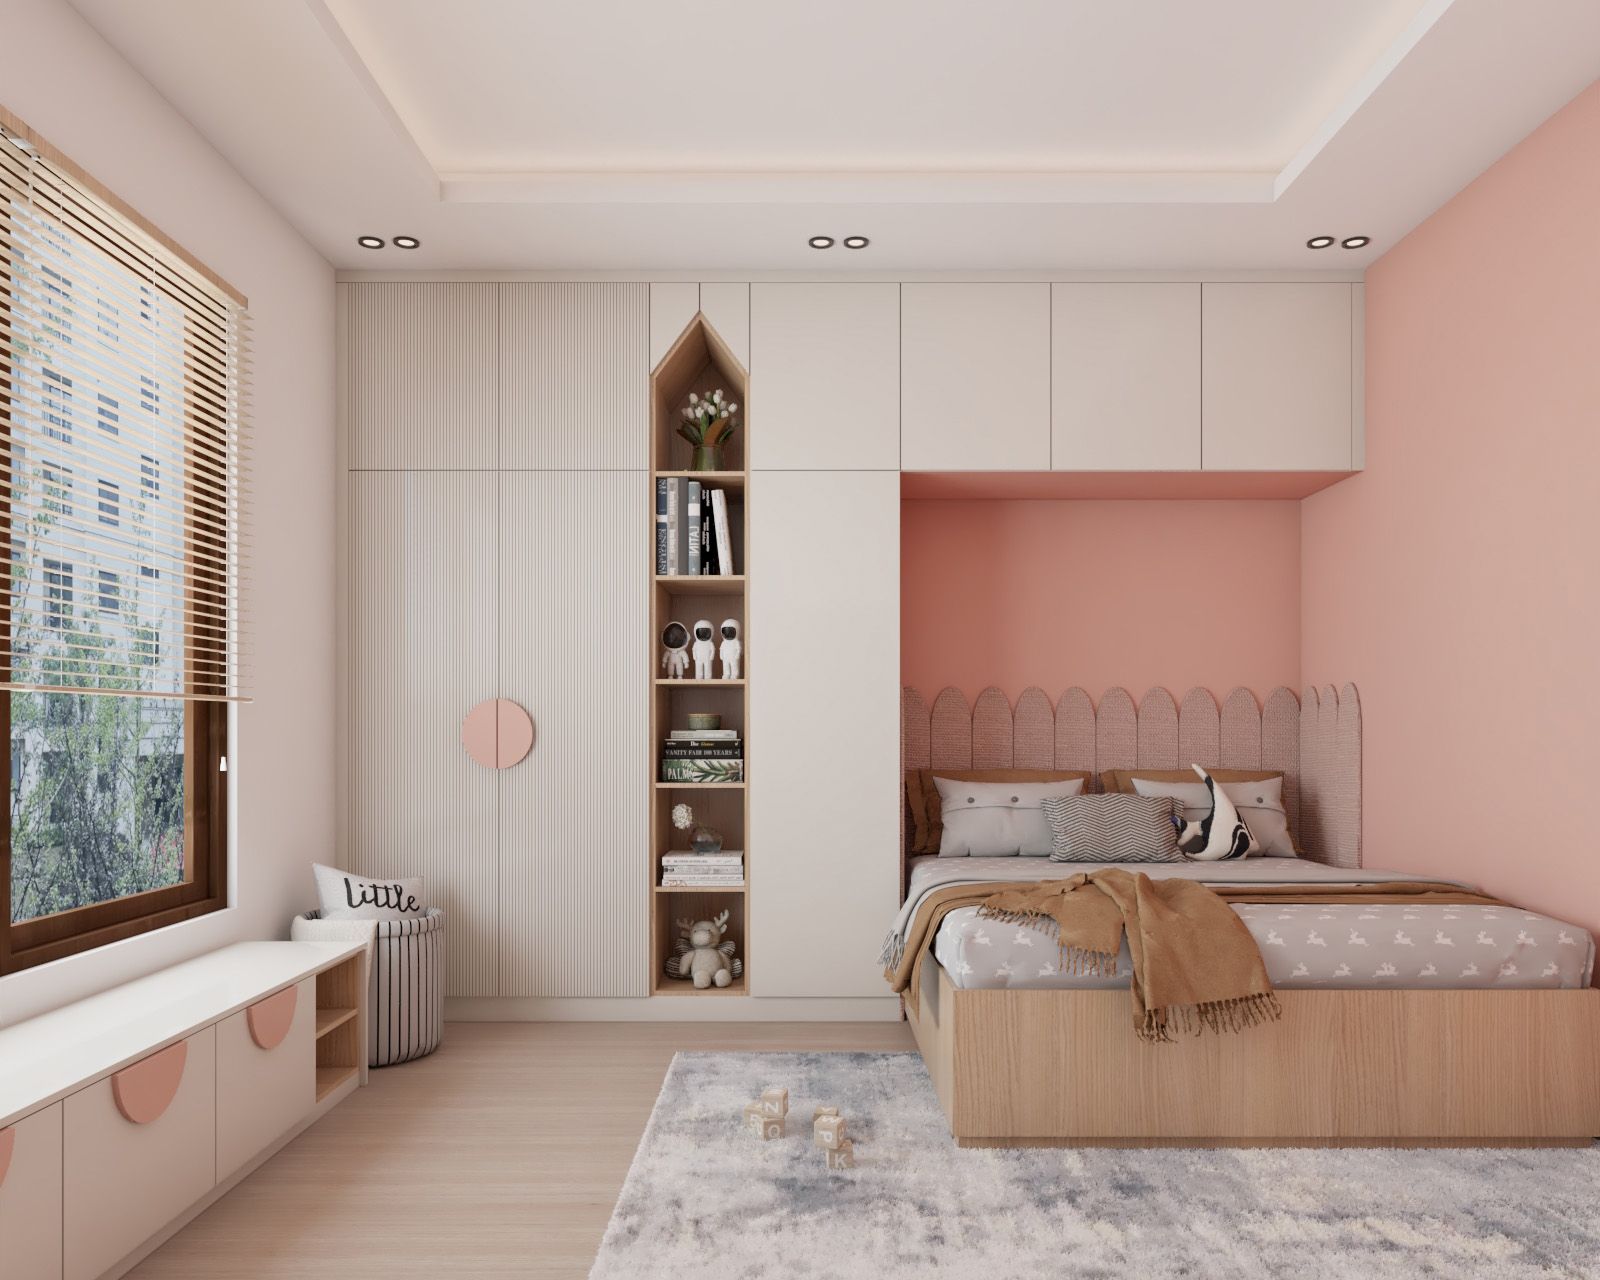 Contemporary Pink And White Girls Room Design With 3-Door Swing Wardrobe